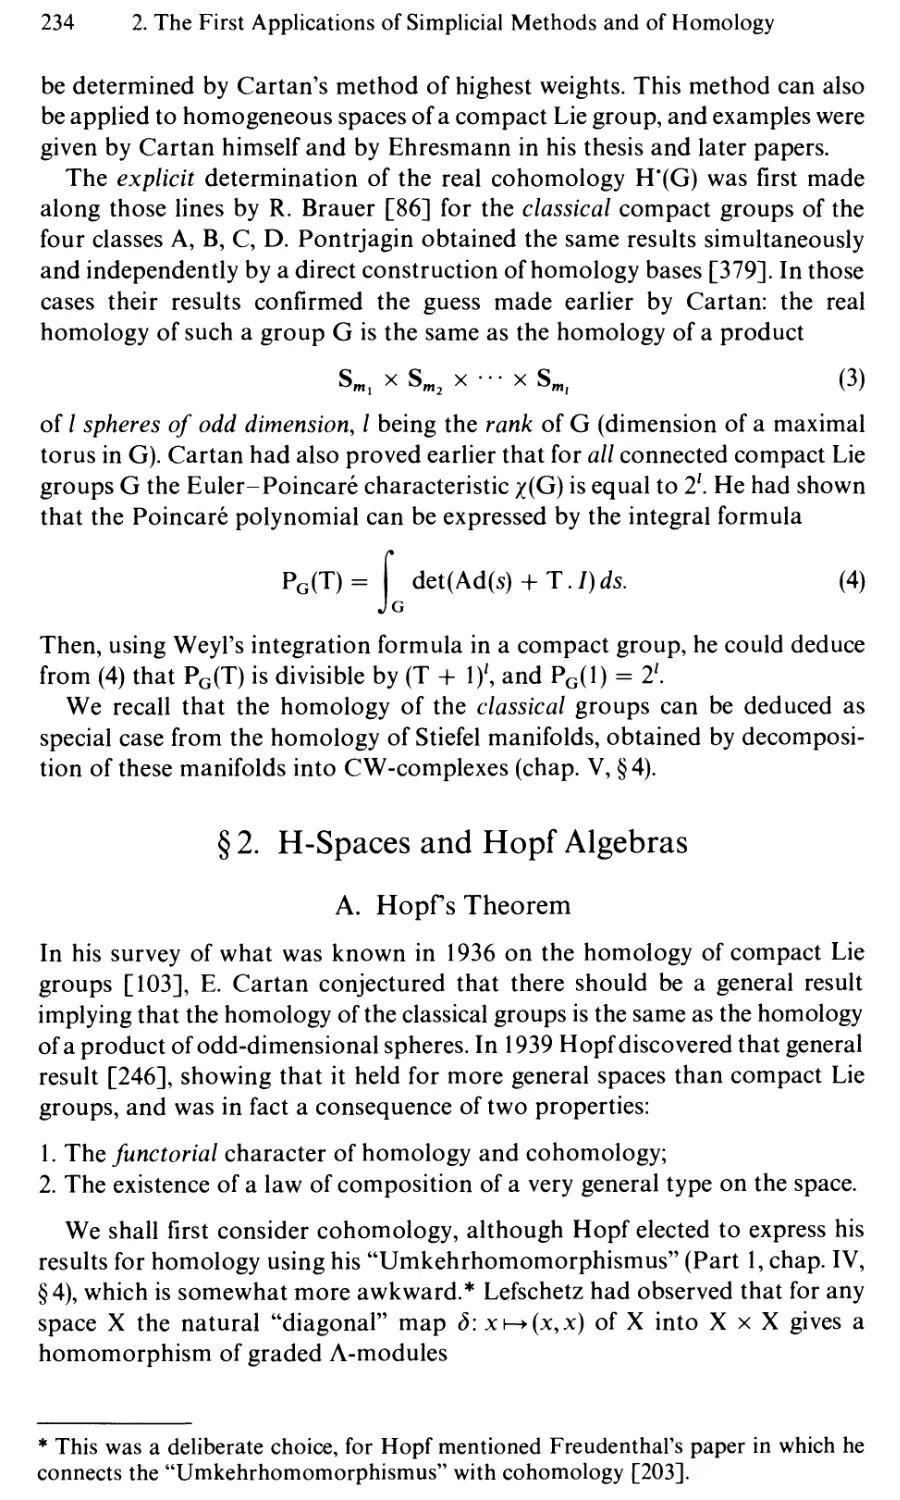 §2. H-Spaces and Hopf Algebras